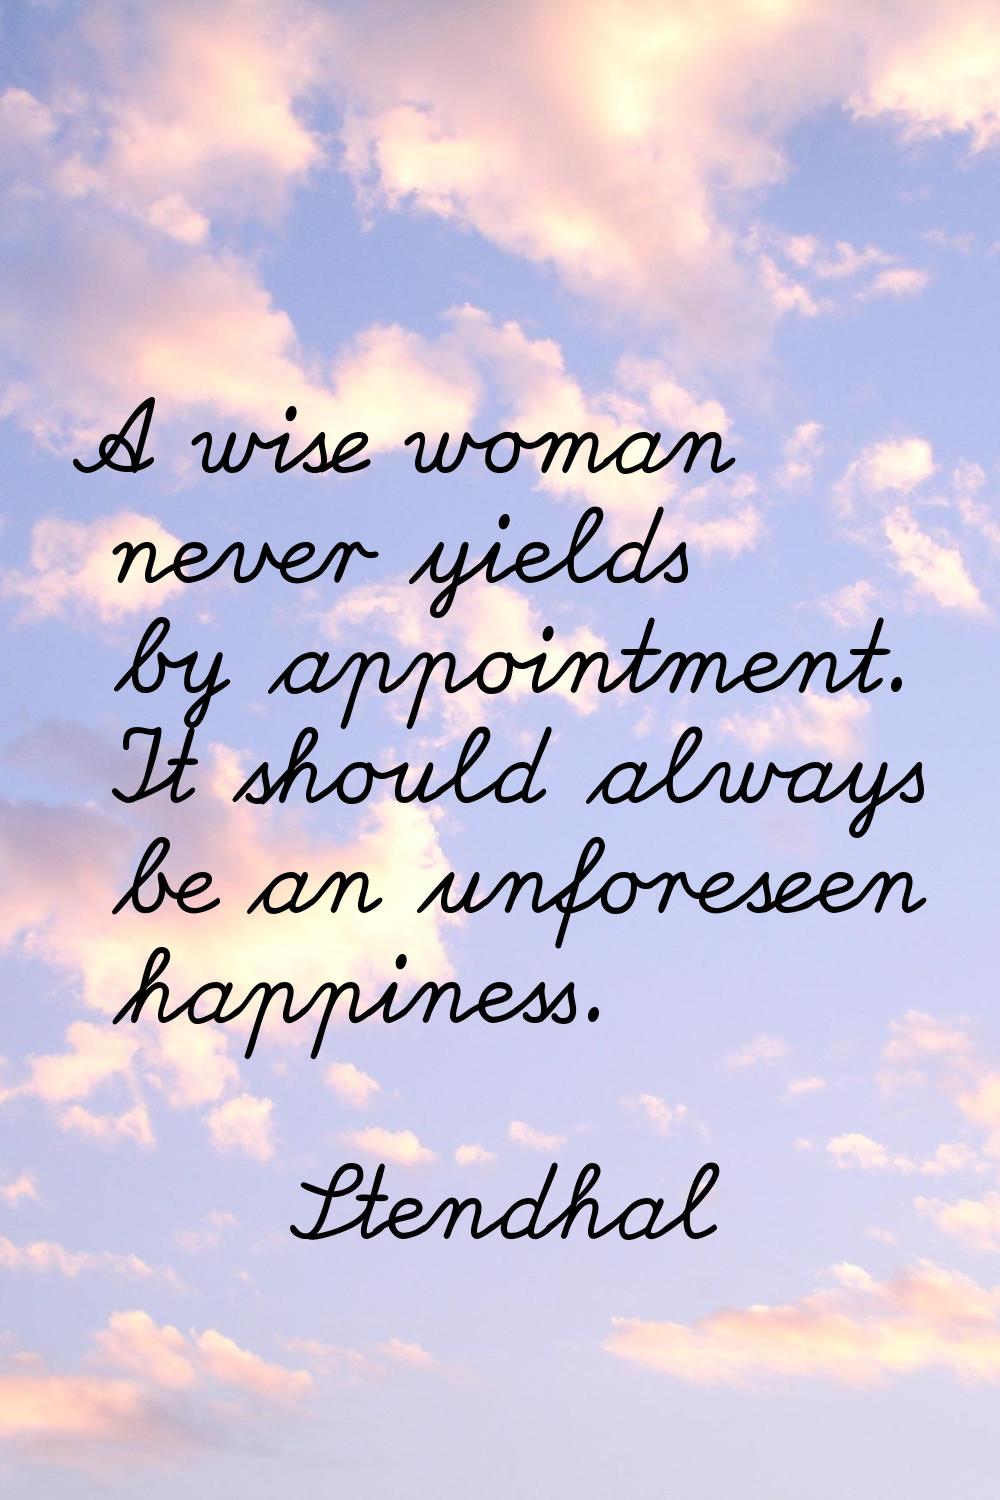 A wise woman never yields by appointment. It should always be an unforeseen happiness.